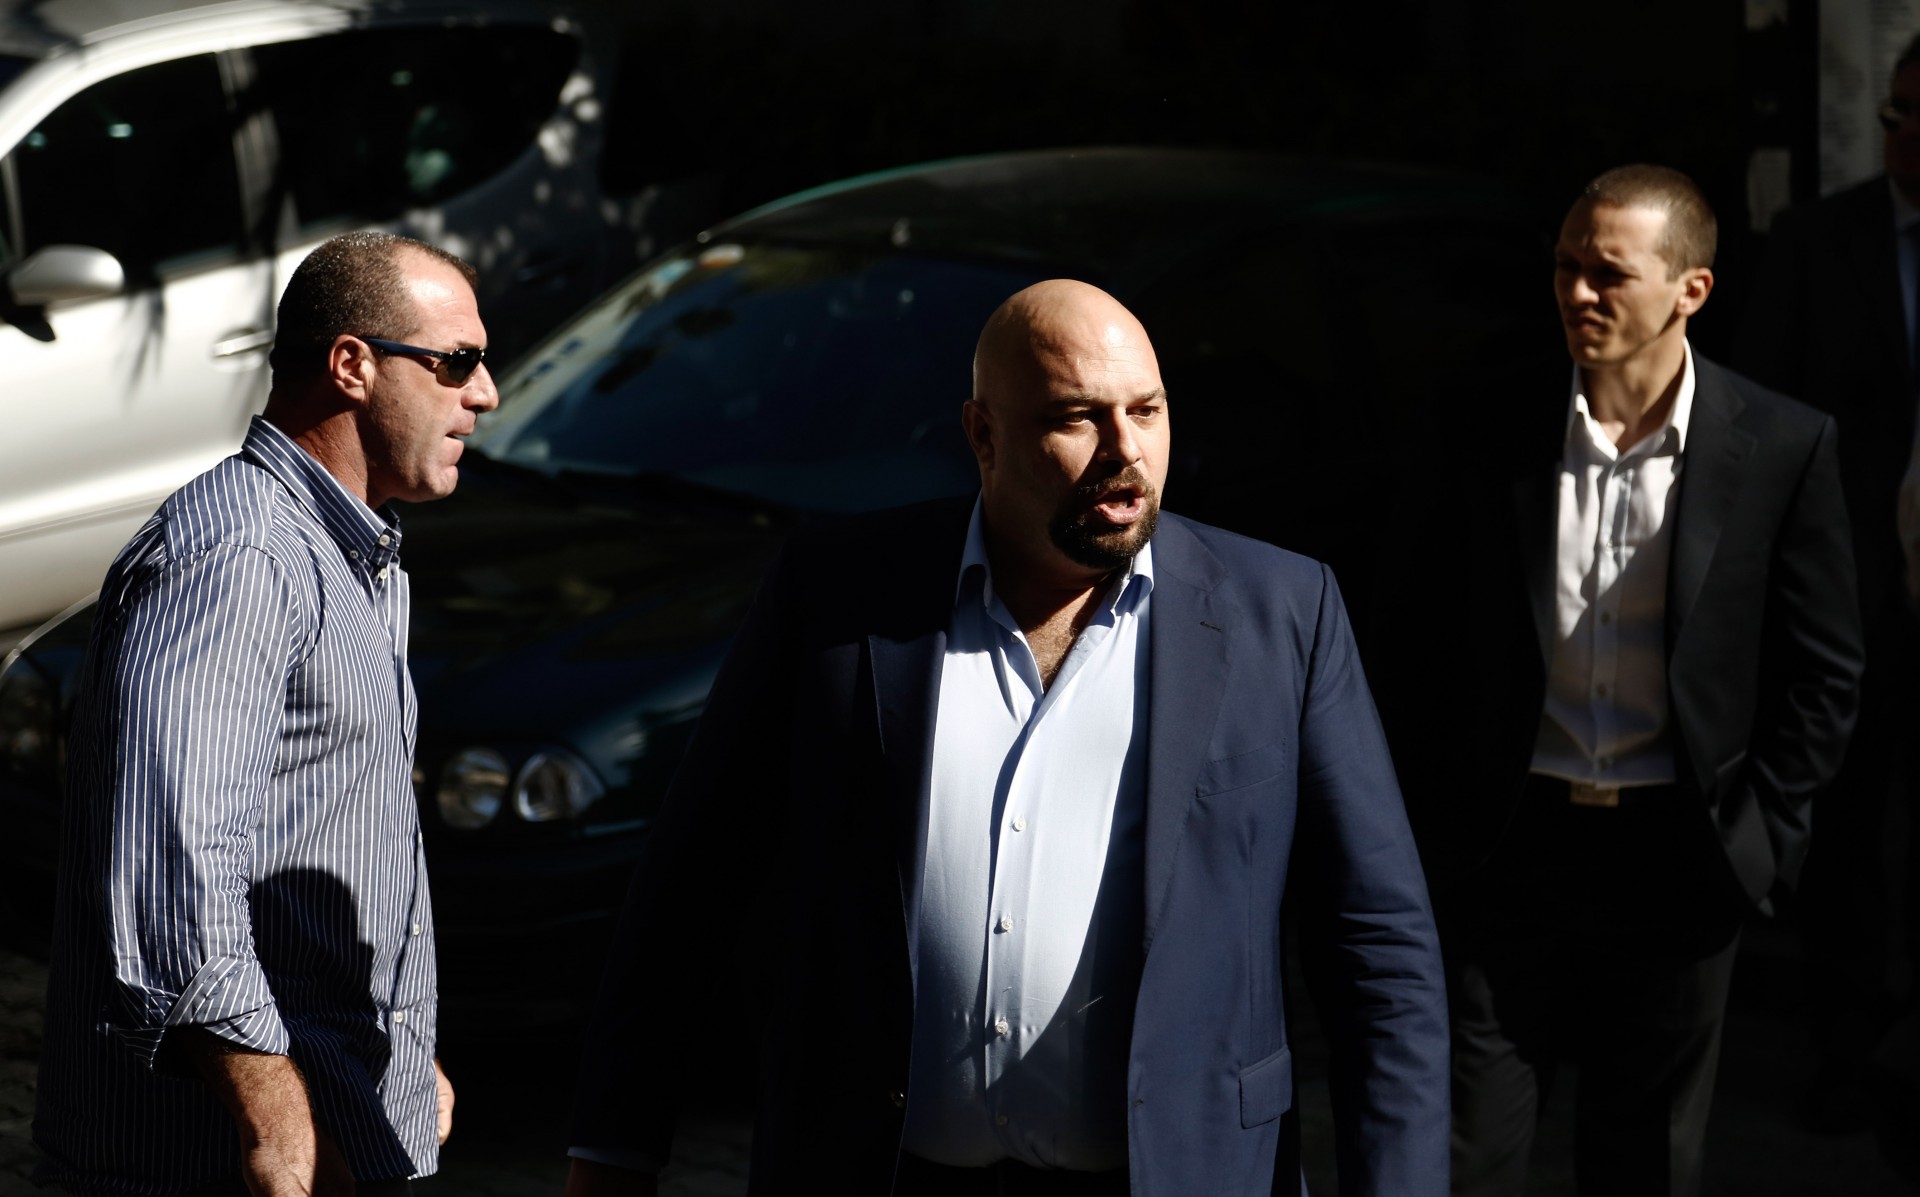 Golden Dawn lawmakers at court / Οι βουλευτές της